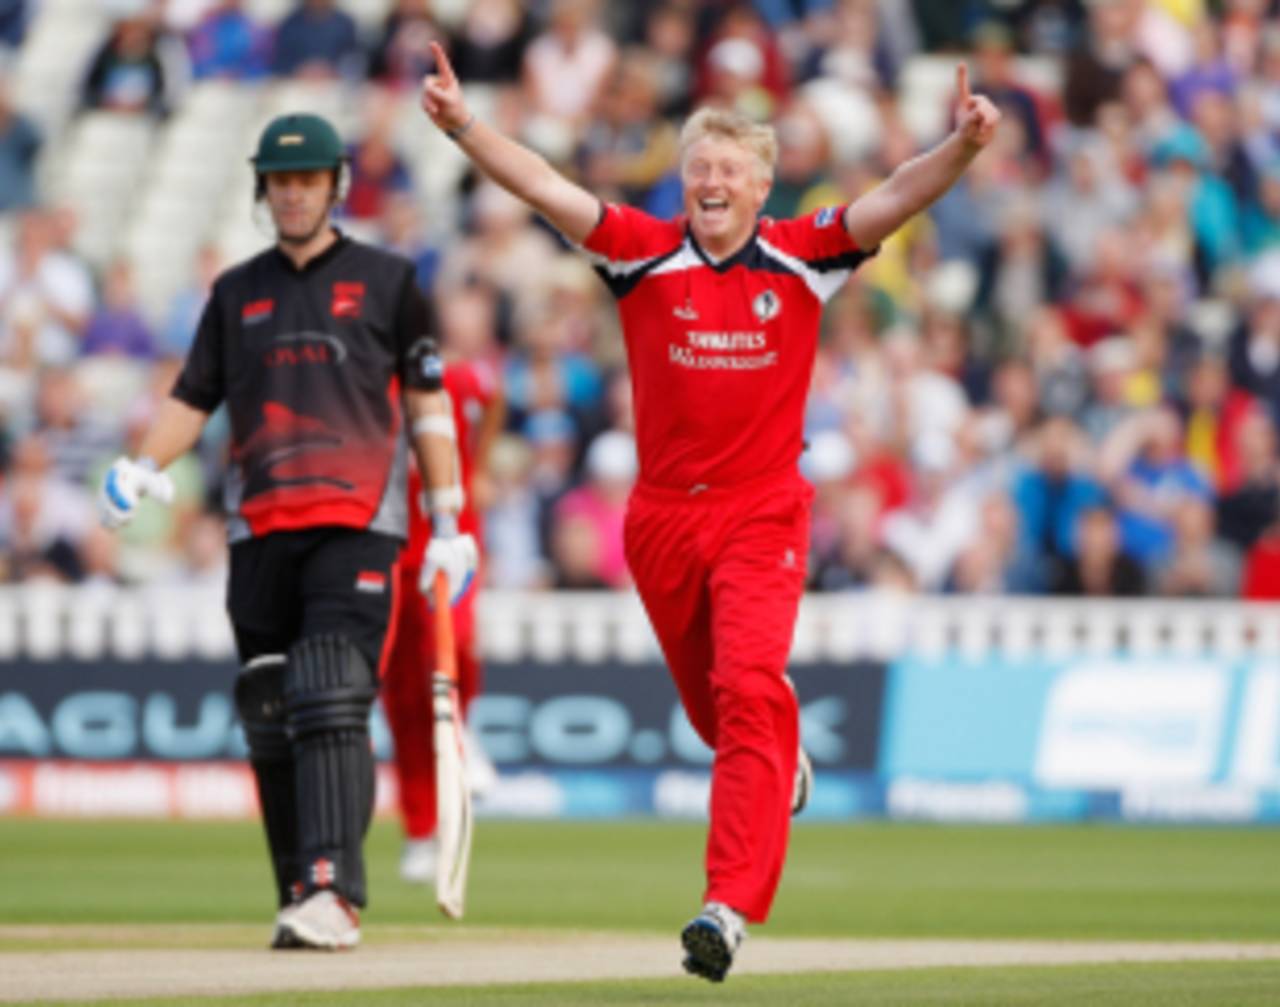 Lancashire captain Glen Chapple picked up a wicket with the very first ball of the match but still ended up on the losing side&nbsp;&nbsp;&bull;&nbsp;&nbsp;Getty Images